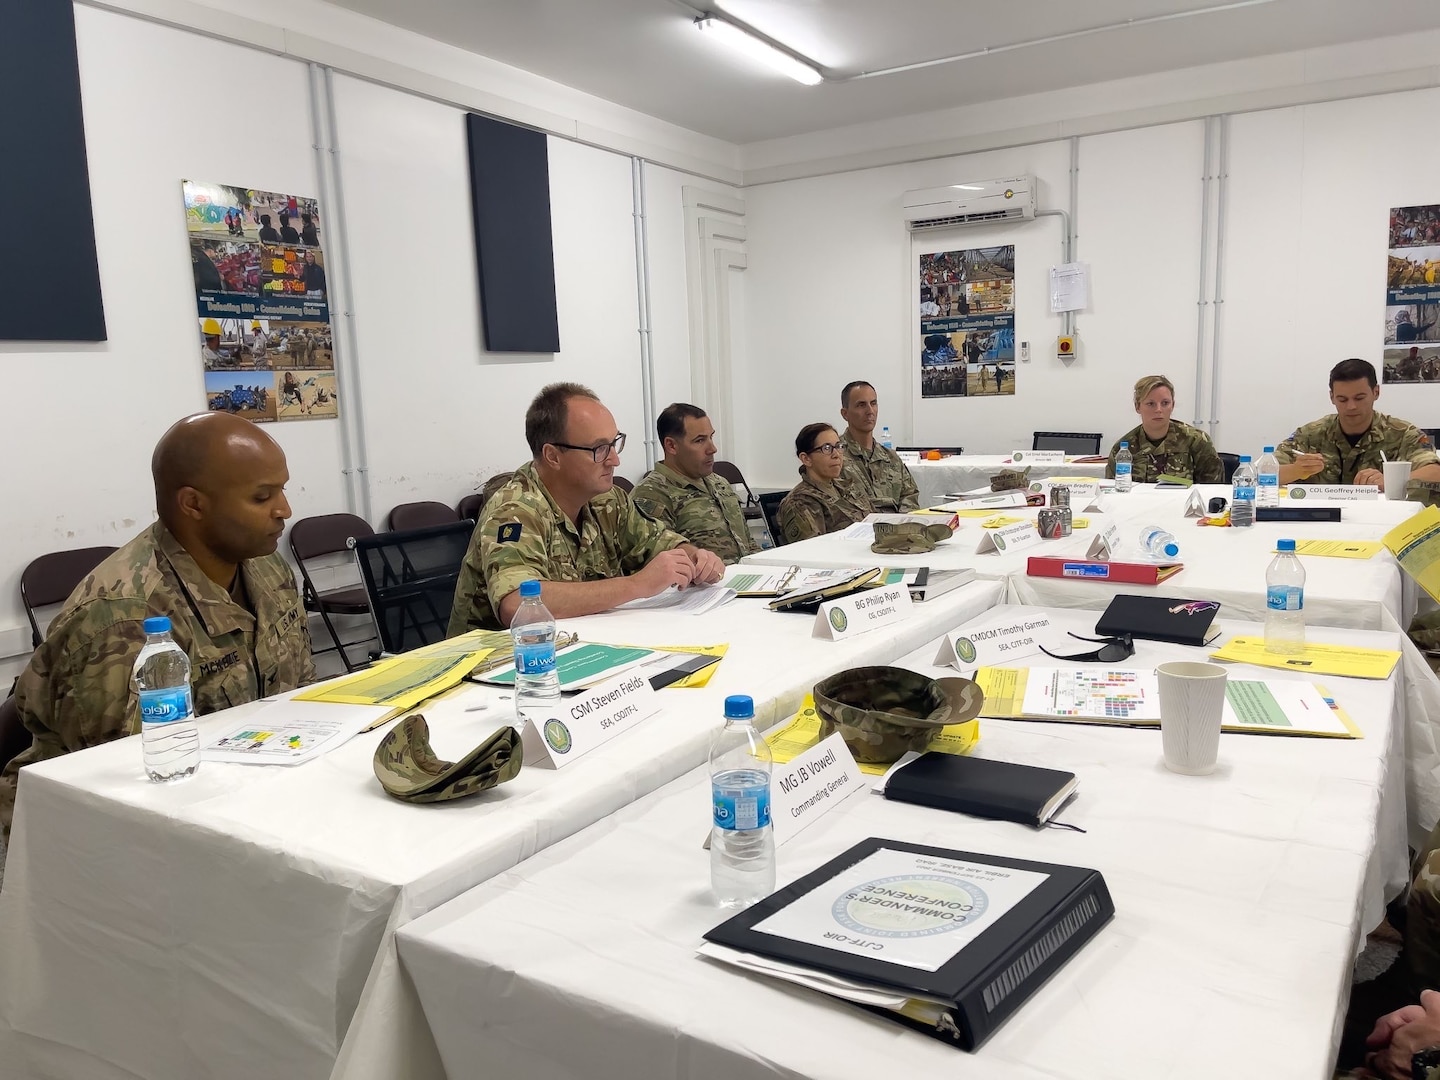 Command teams and leaders from across Combined Joint Task Force - Operation Inherent Resolve attended the CJTF-OIR Commanders Conference.